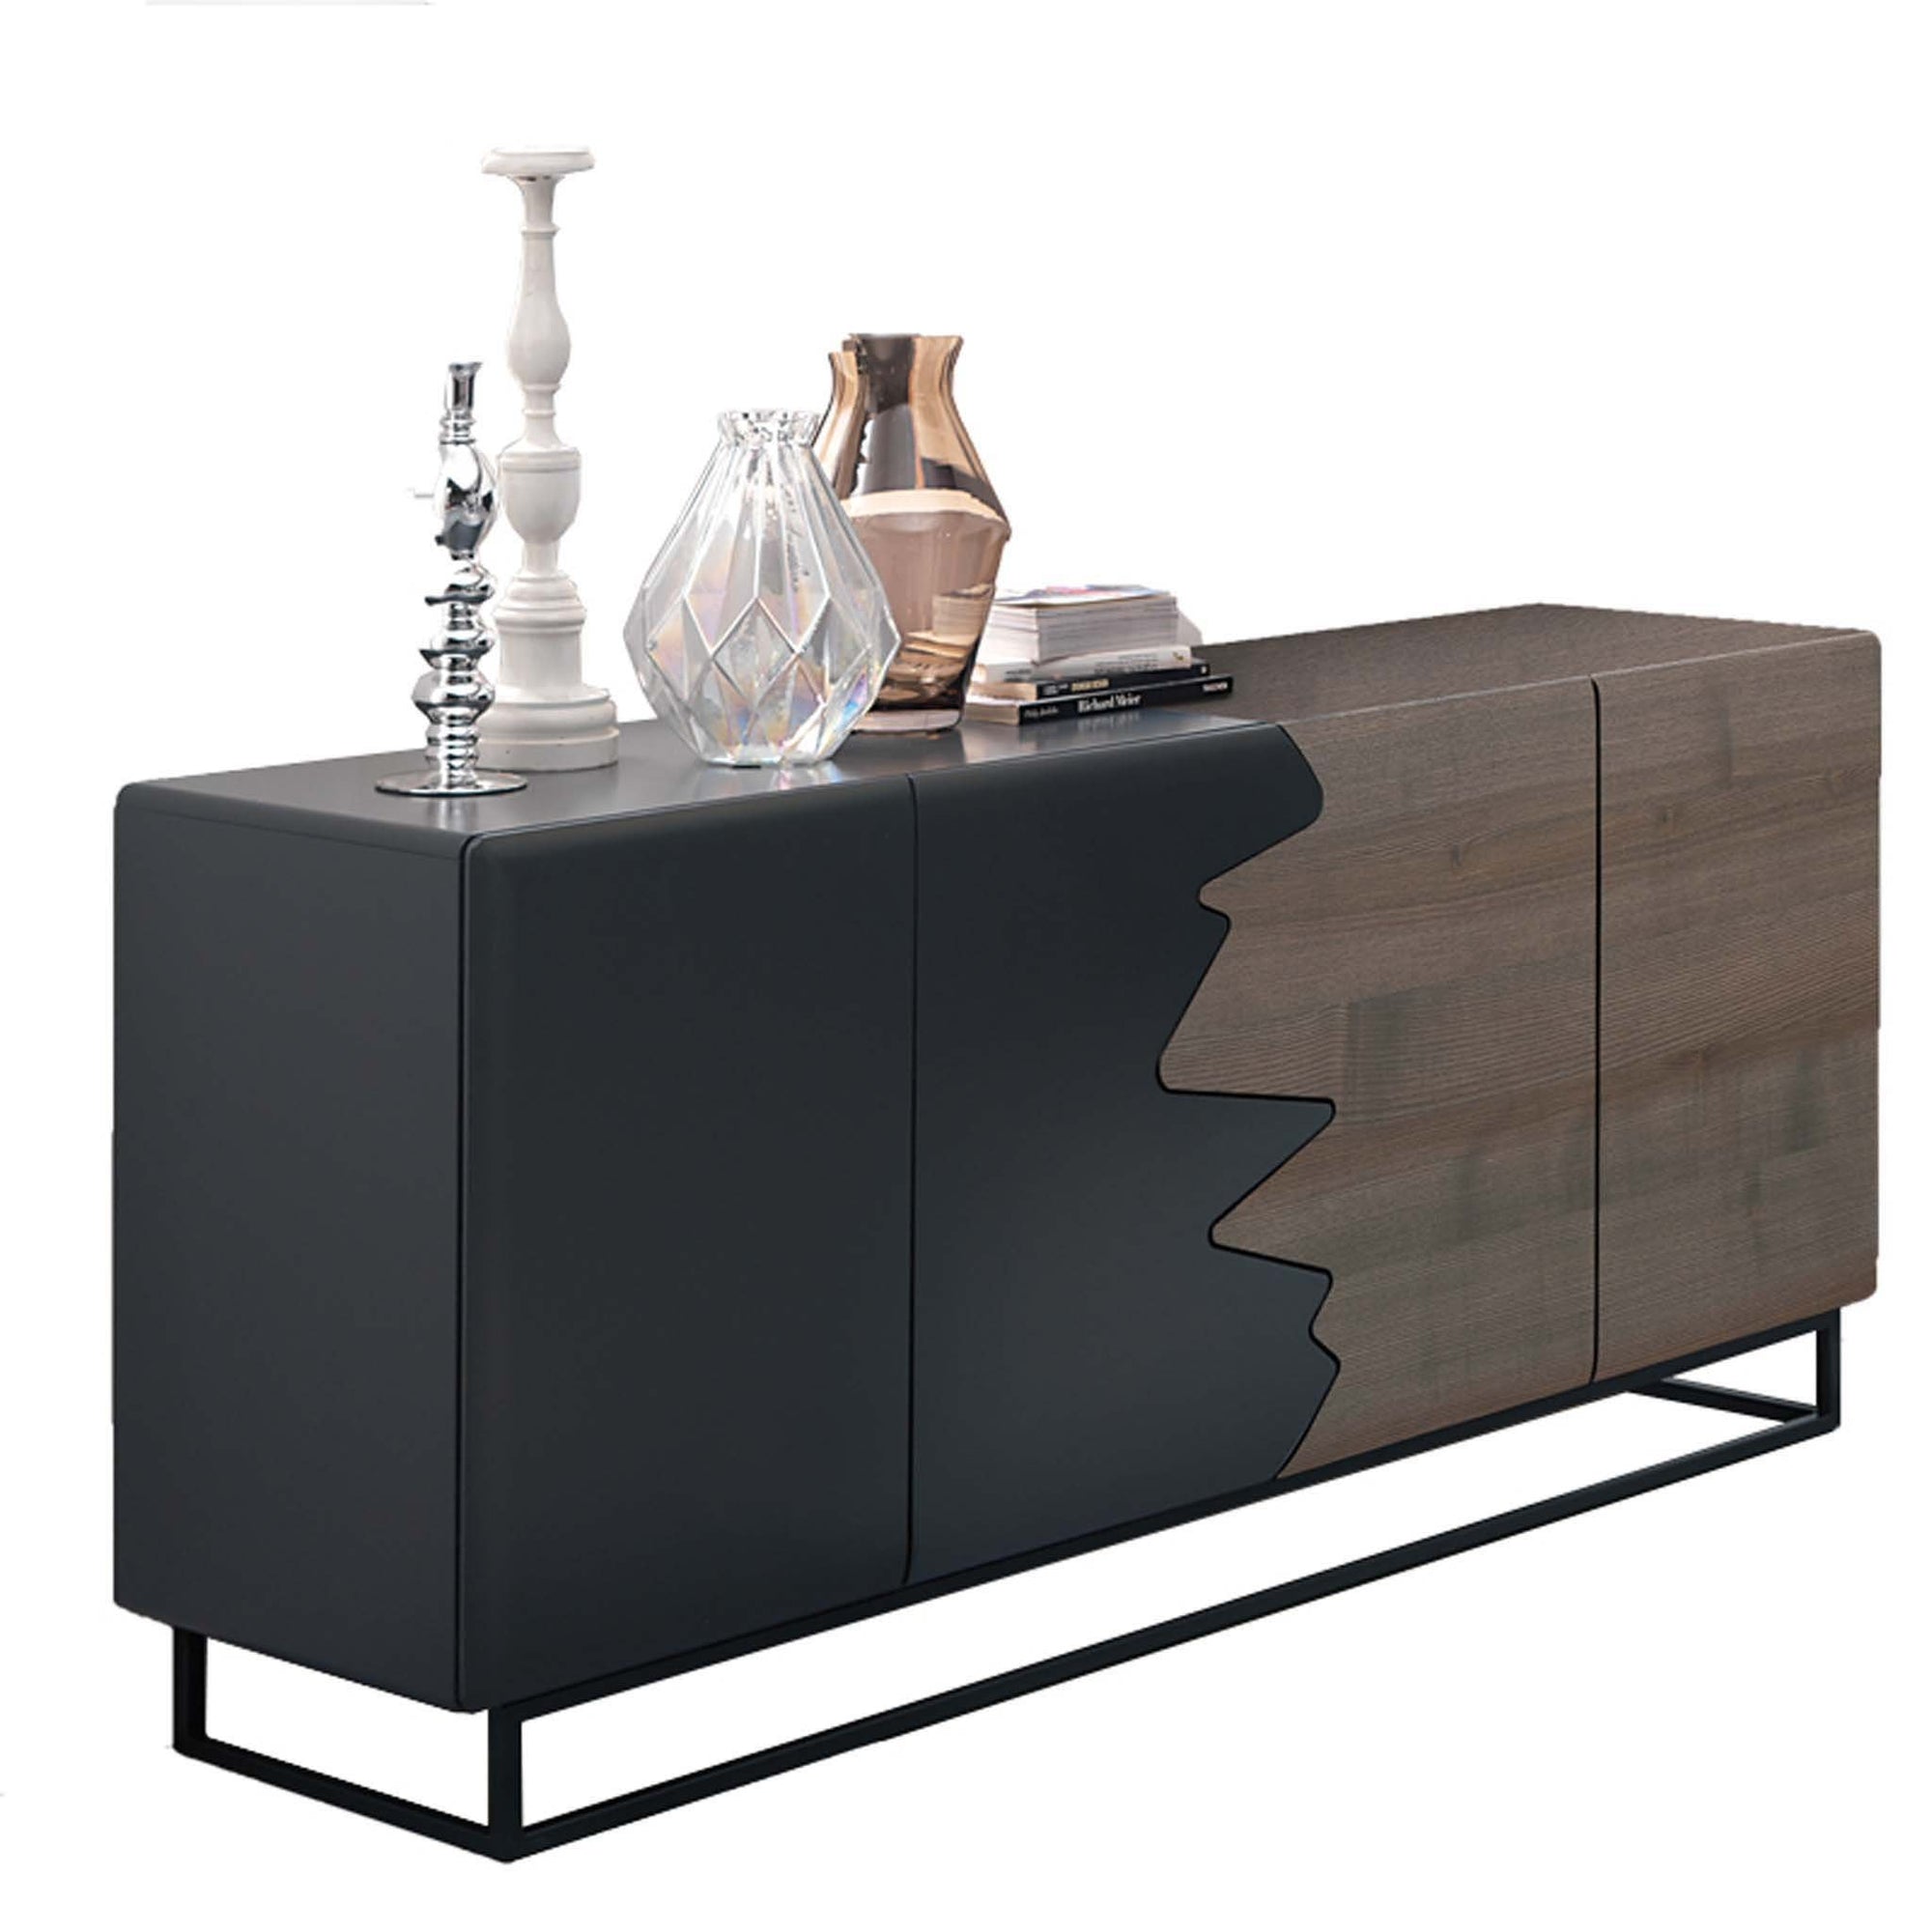 Bellini-Kali Sideboard, ASH/ ANTHRACITE with Metal Base-Sideboards & Buffets-MODTEMPO